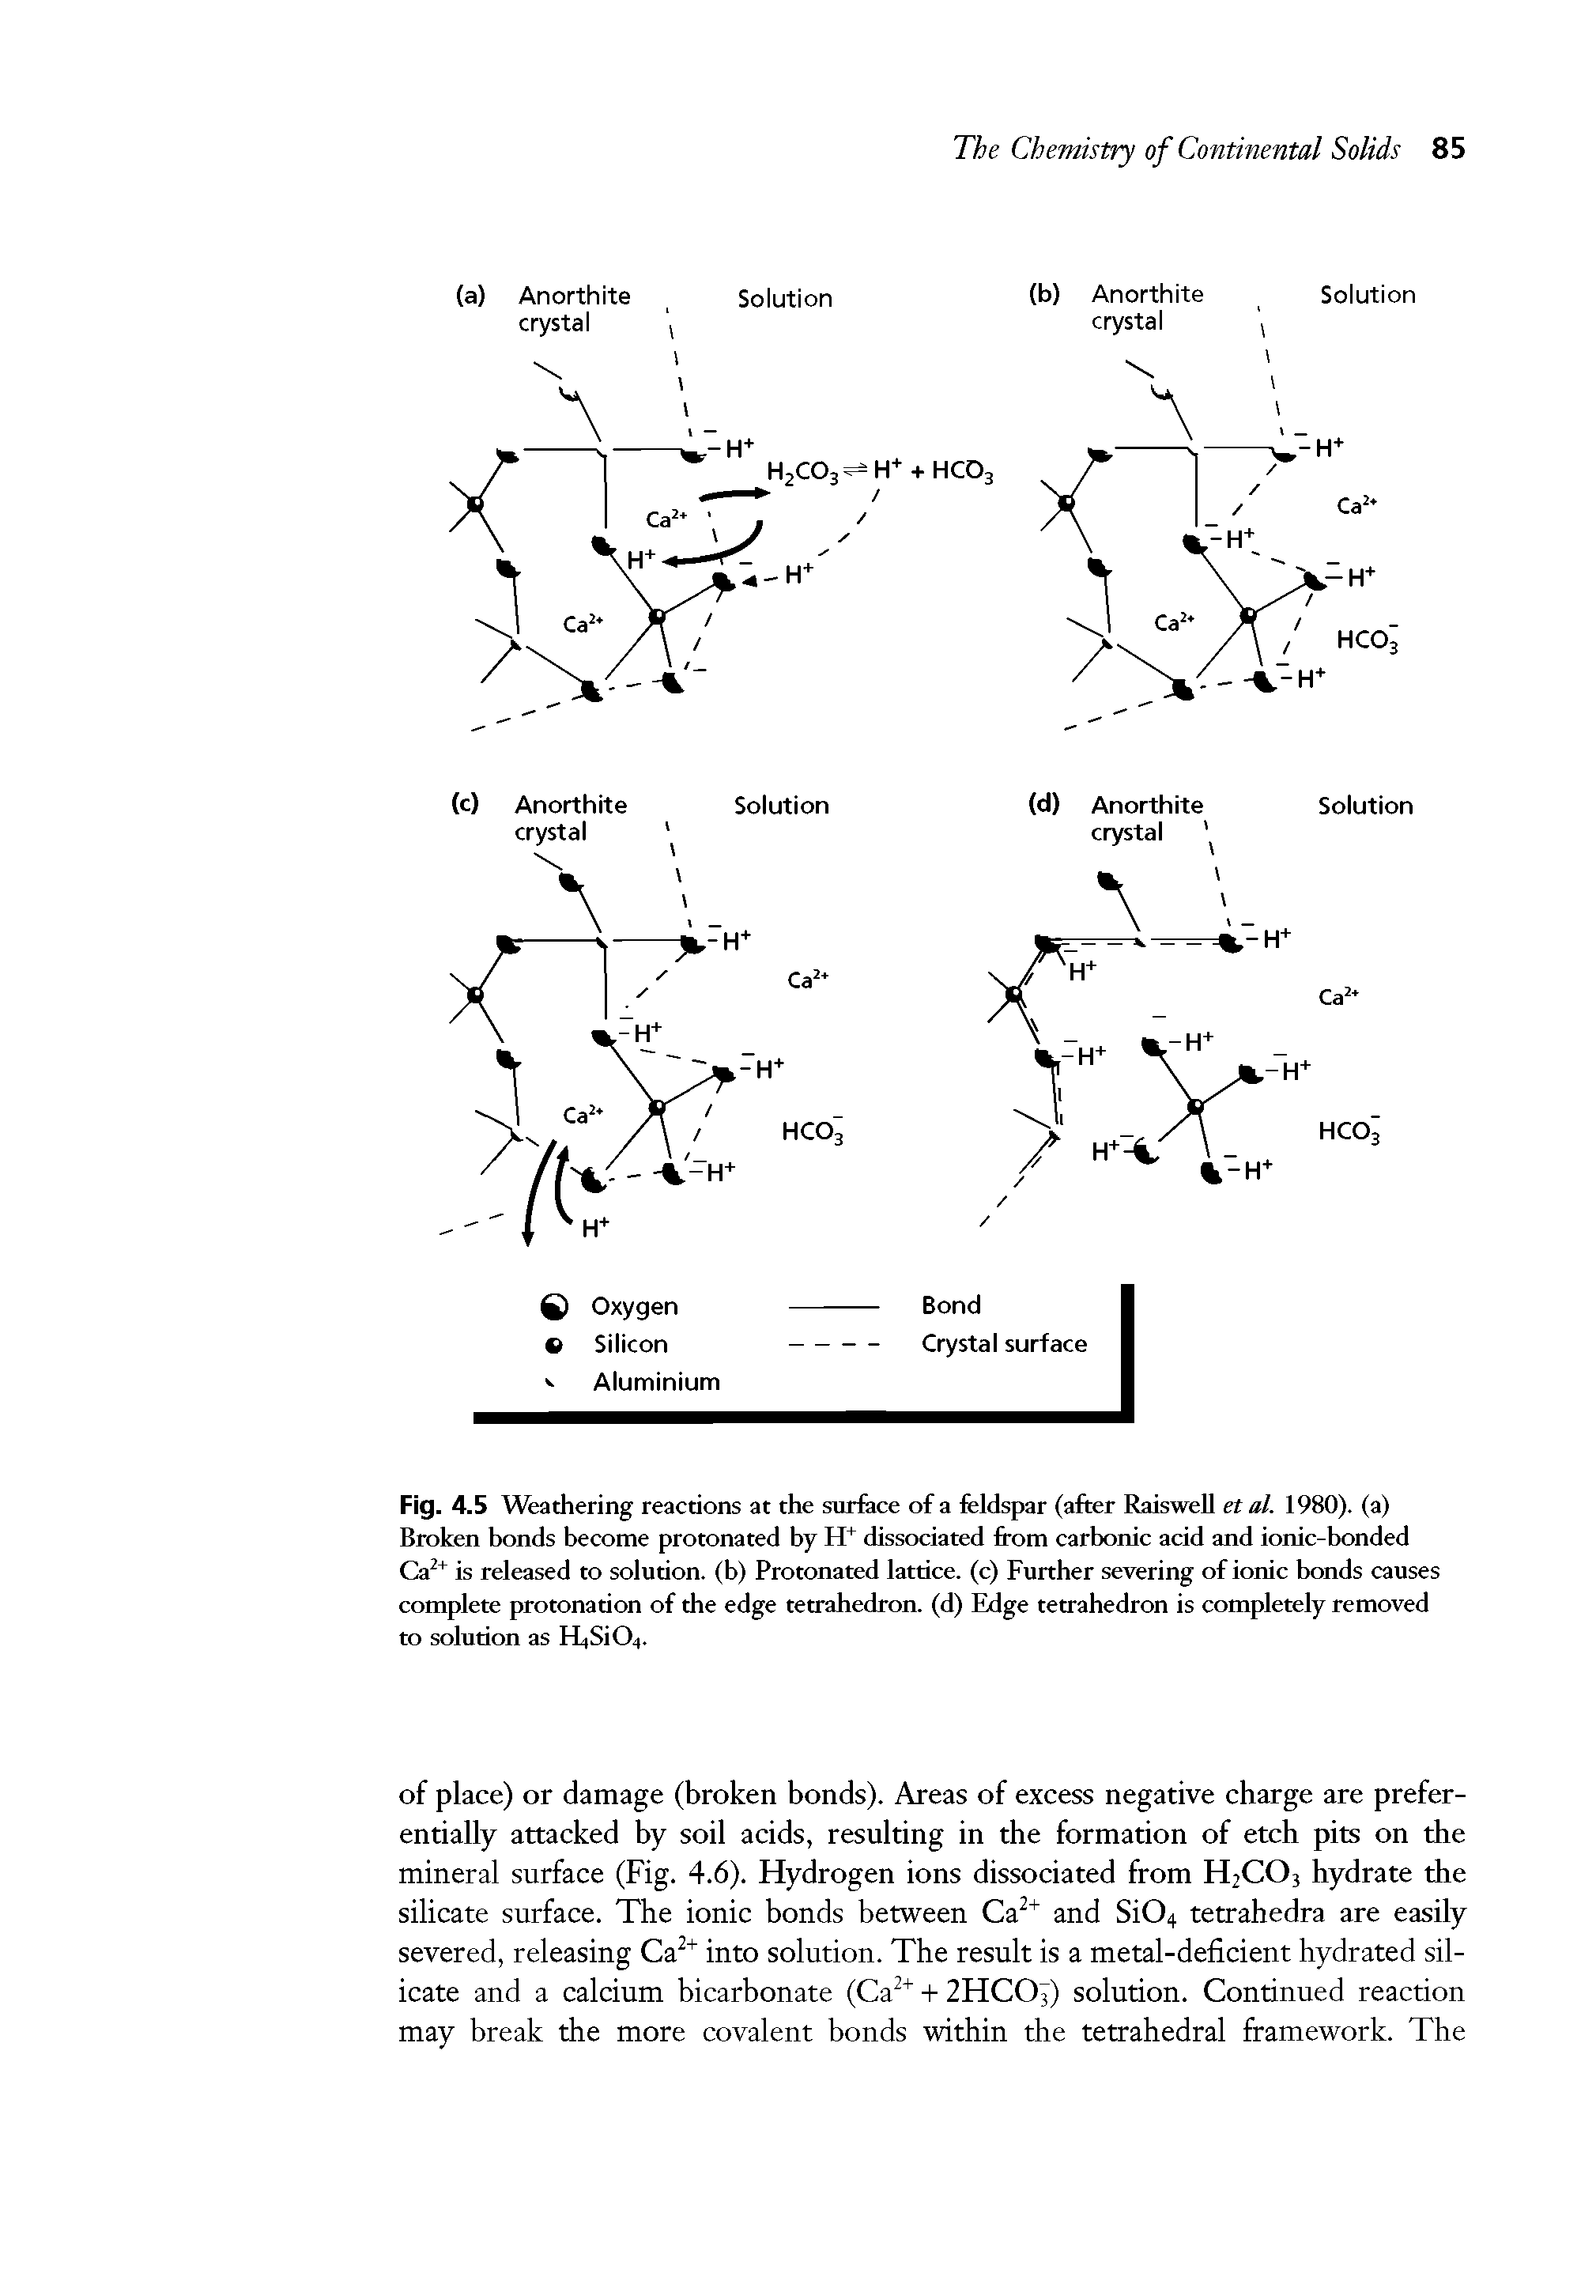 Fig. 4.5 Weathering reactions at the surface of a feldspar (after Raiswell et al. 1980). (a) Broken bonds become protonated by H+ dissociated from carbonic acid and ionic-bonded Ca2+ is released to solution, (b) Protonated lattice, (c) Further severing of ionic bonds causes complete protonation of the edge tetrahedron, (d) Edge tetrahedron is completely removed to solution as HiSith.